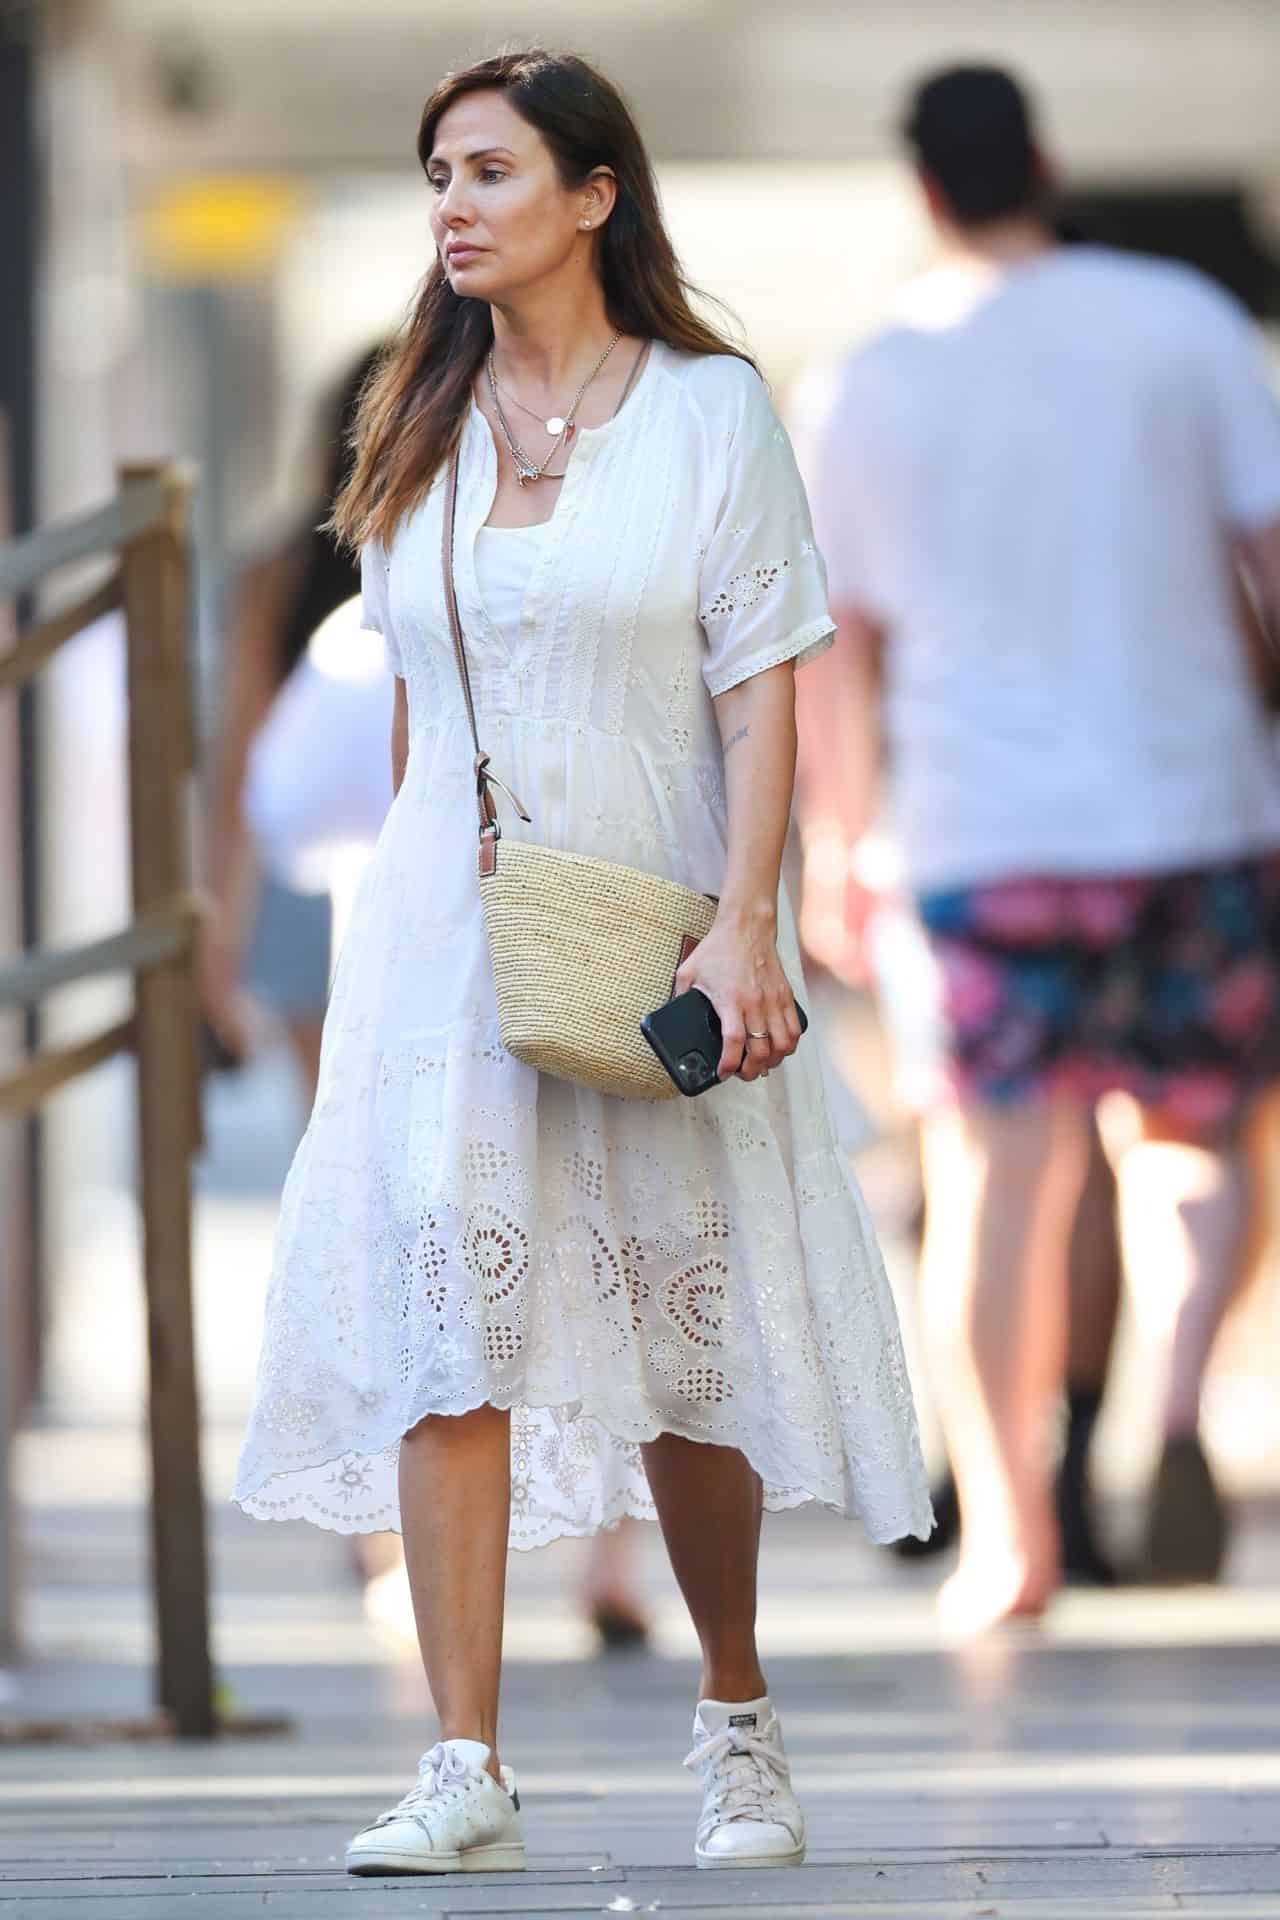 Natalie Imbruglia was a Lovely Sight in White as she Strolled in Sydney